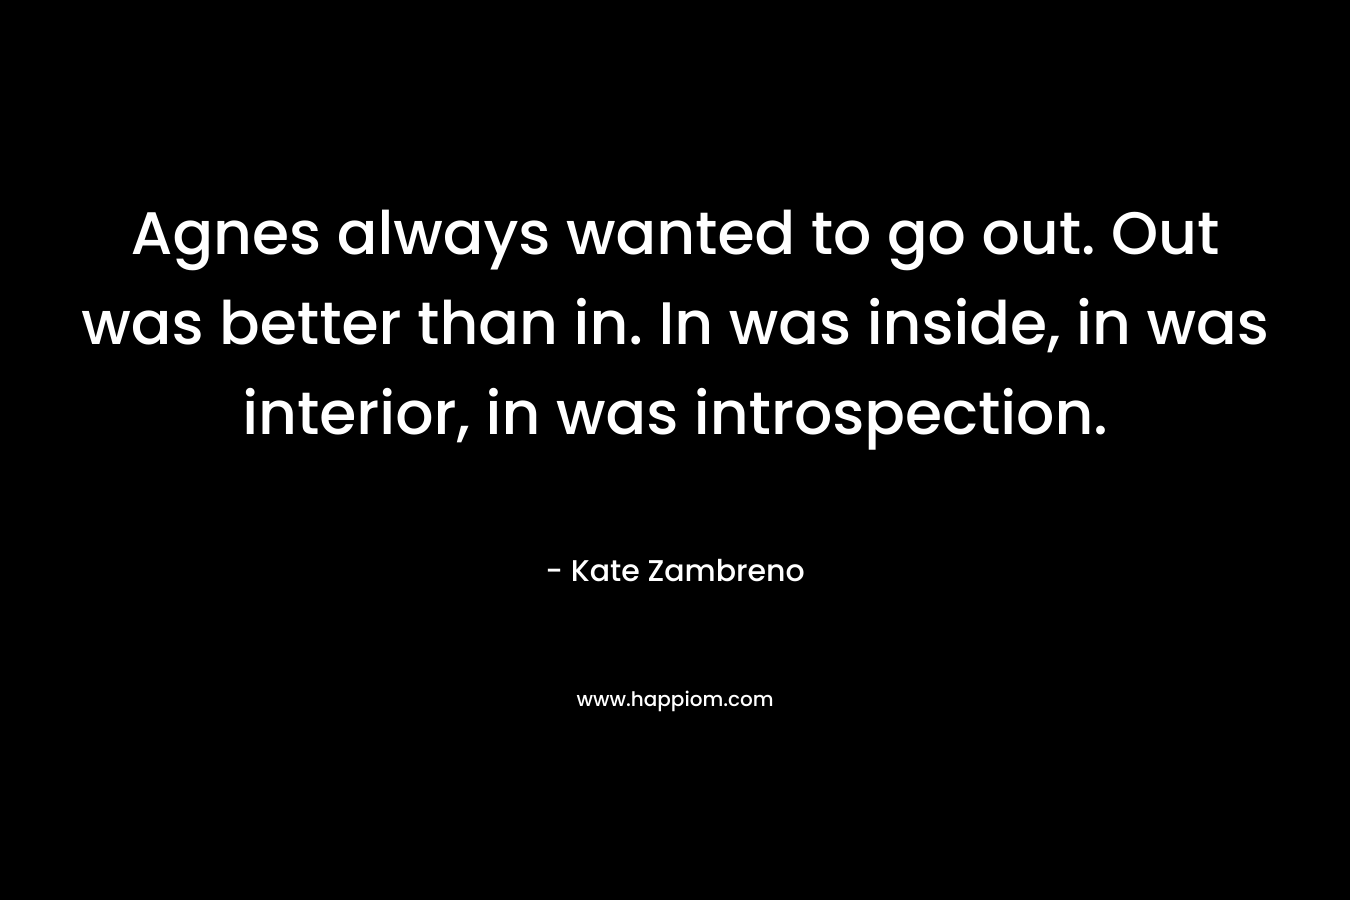 Agnes always wanted to go out. Out was better than in. In was inside, in was interior, in was introspection. – Kate Zambreno